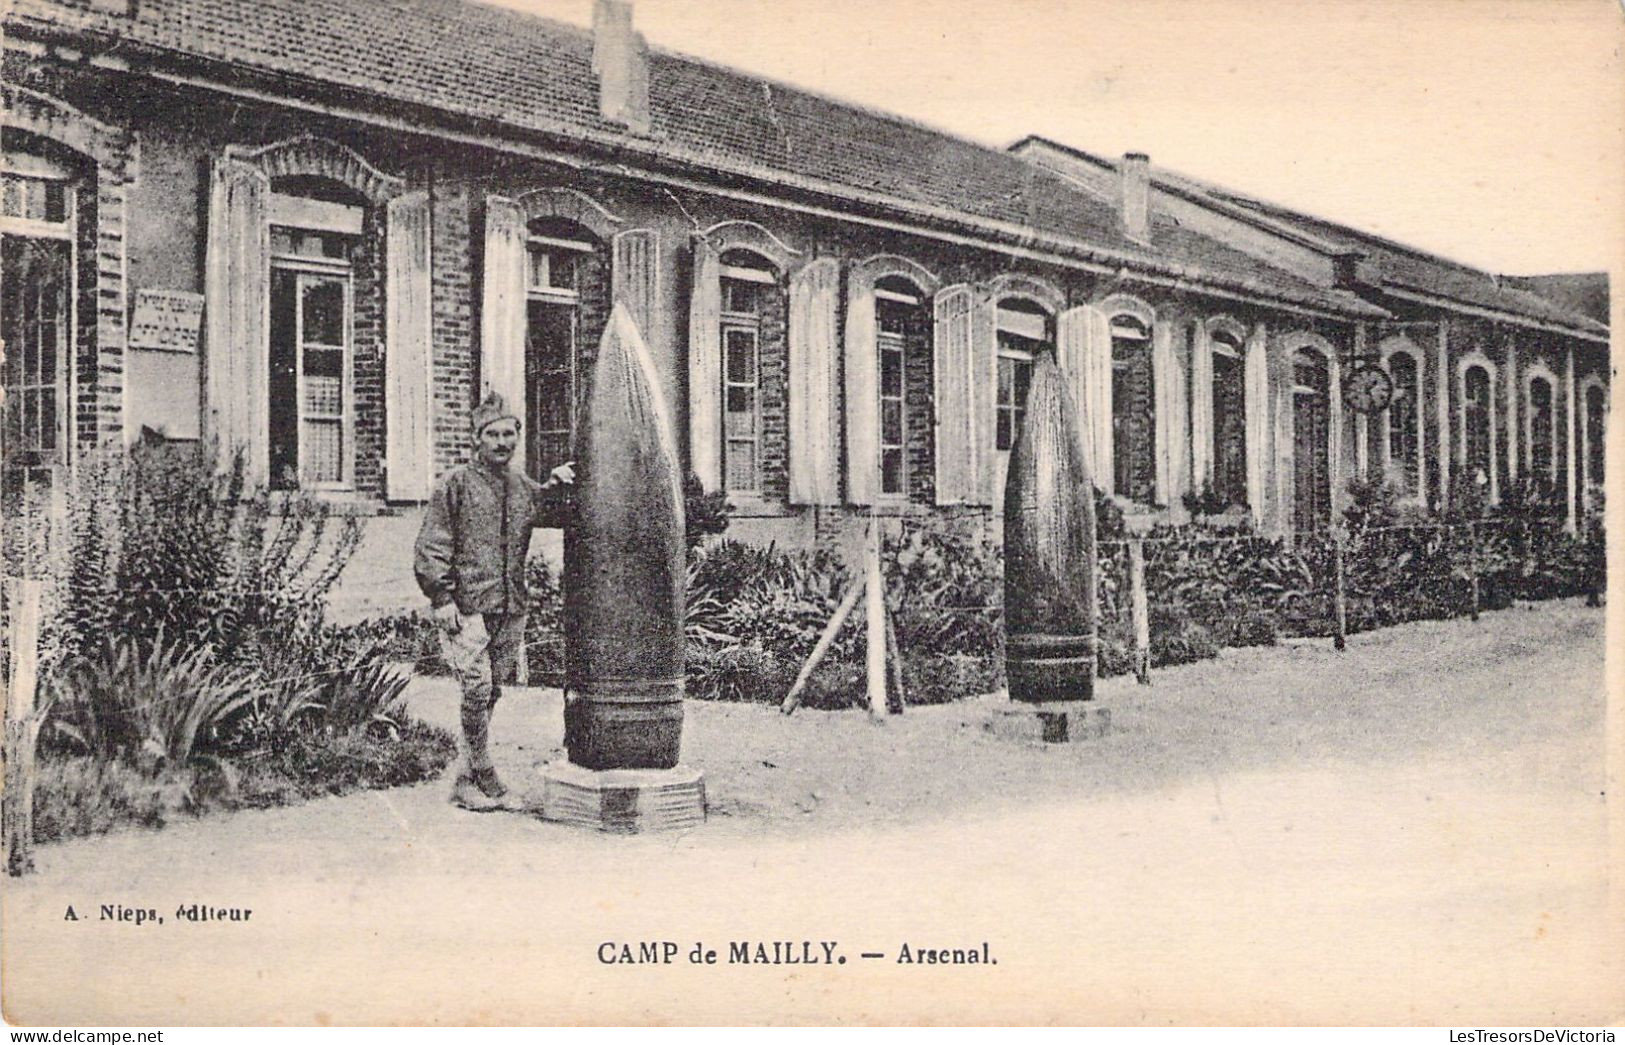 FRANCE - 10 - Camp De Mailly - Arsenal - Obus - Militaria - Carte Postale Ancienne - Mailly-le-Camp